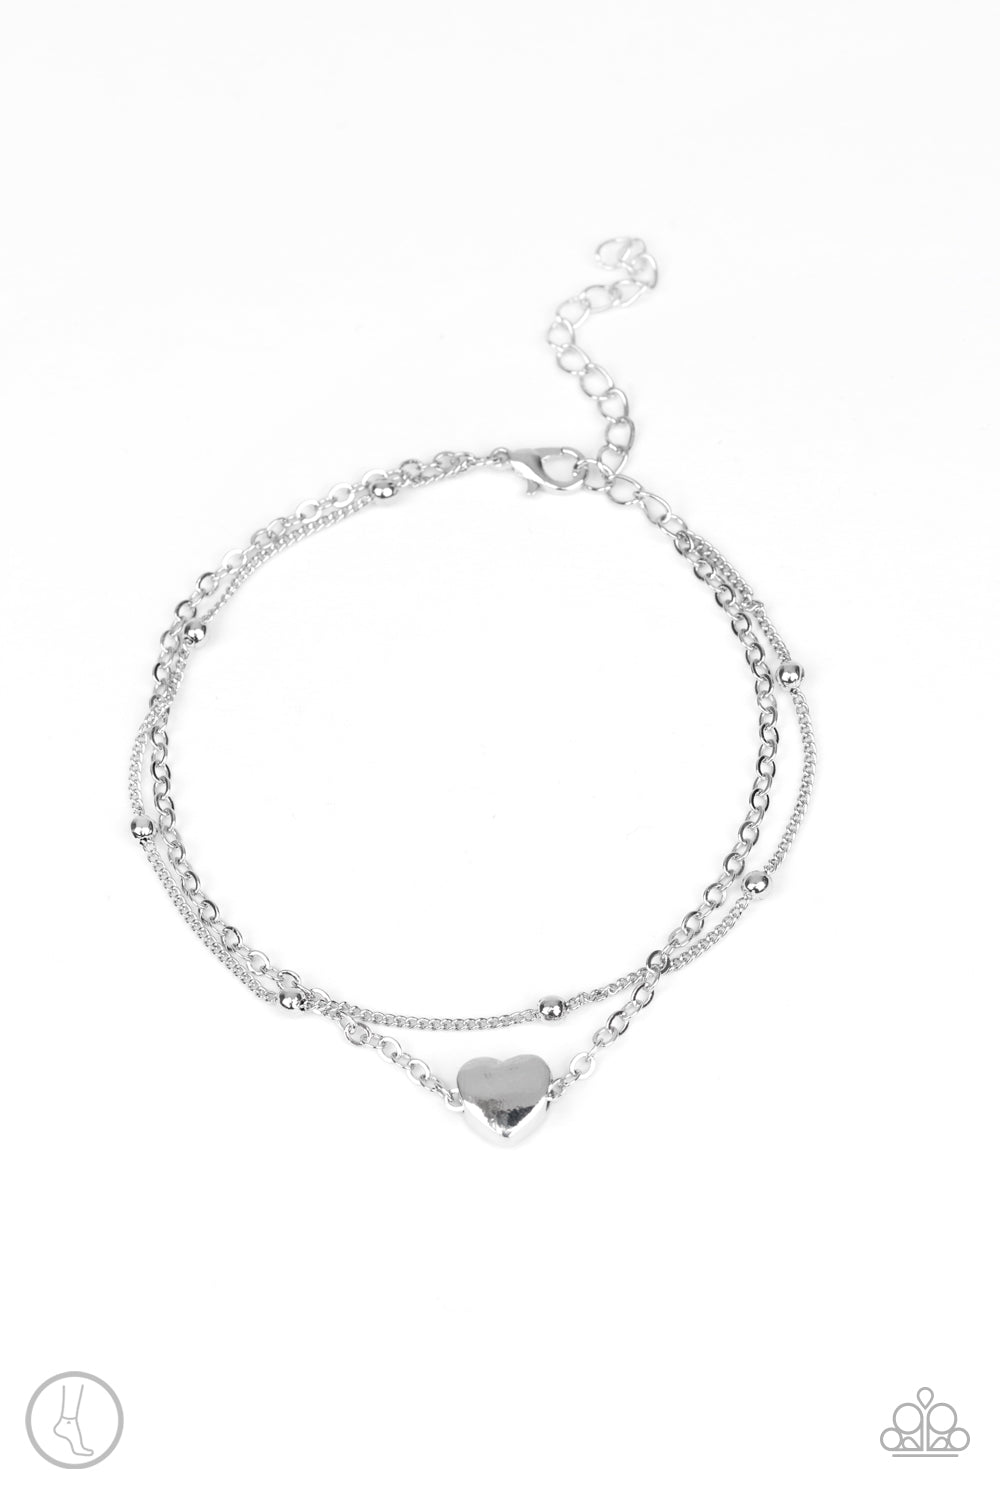 Ocean Heart Silver Paparazzi Anklet Cashmere Pink Jewels - Cashmere Pink Jewels & Accessories, Cashmere Pink Jewels & Accessories - Paparazzi